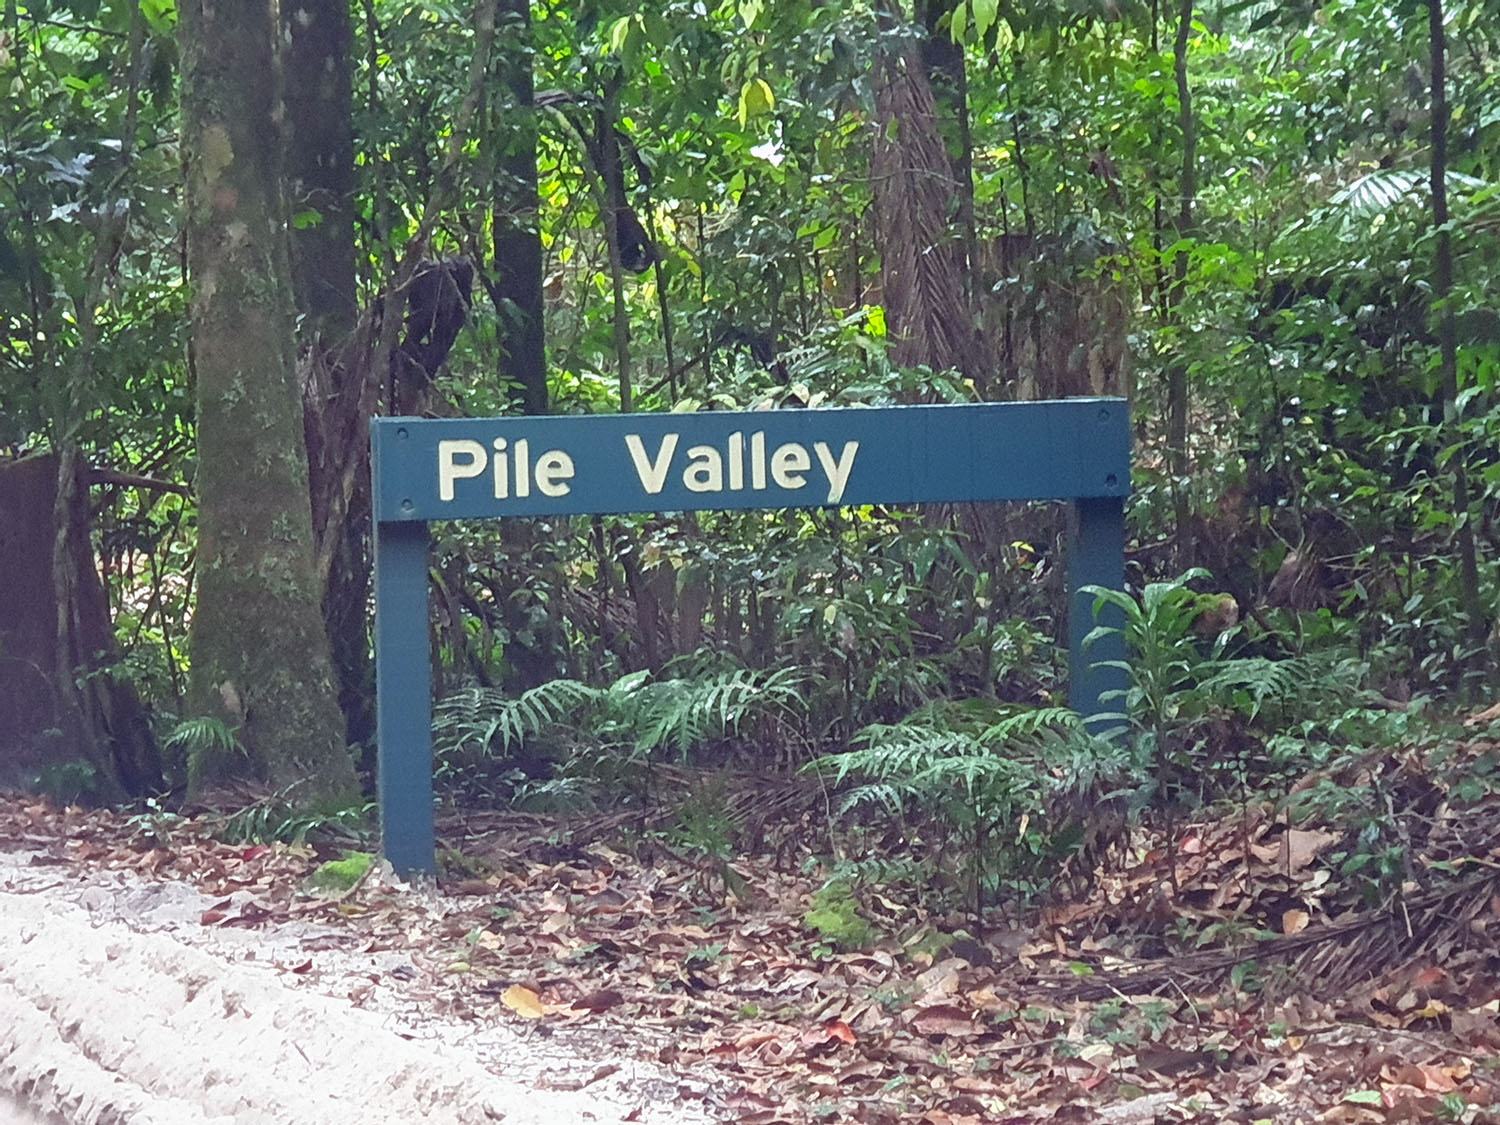 Pile valley in the rainforrest